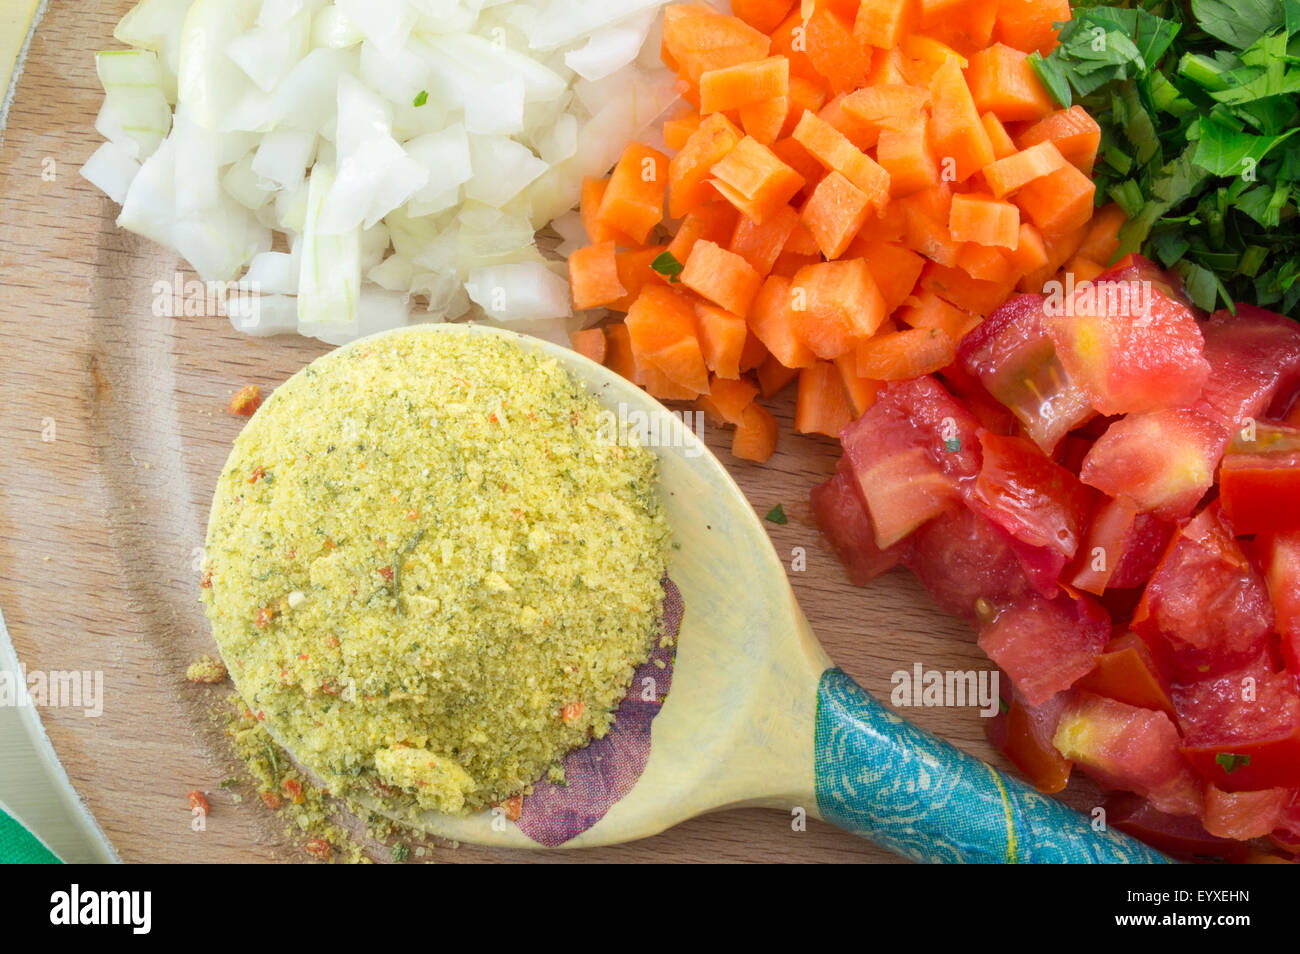 Wooden spoon with spices and colorful sliced vegetables on the board ready for cooking Stock Photo